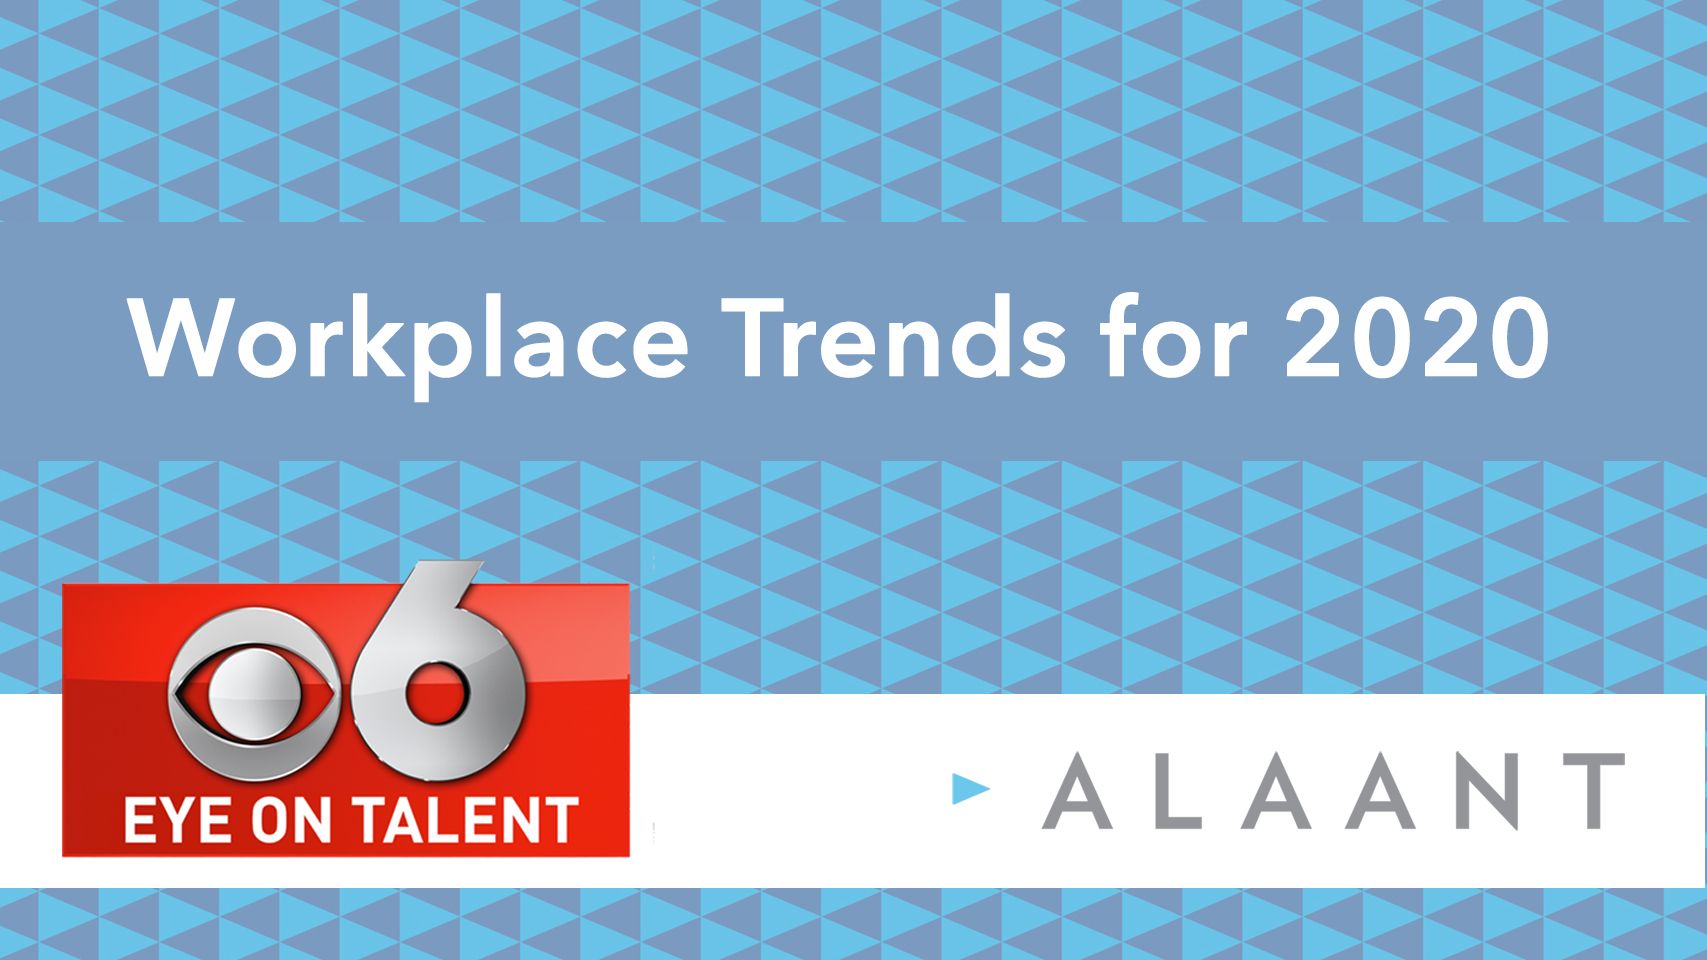 Alaant Eye on Talent Workplace Trends for 2020